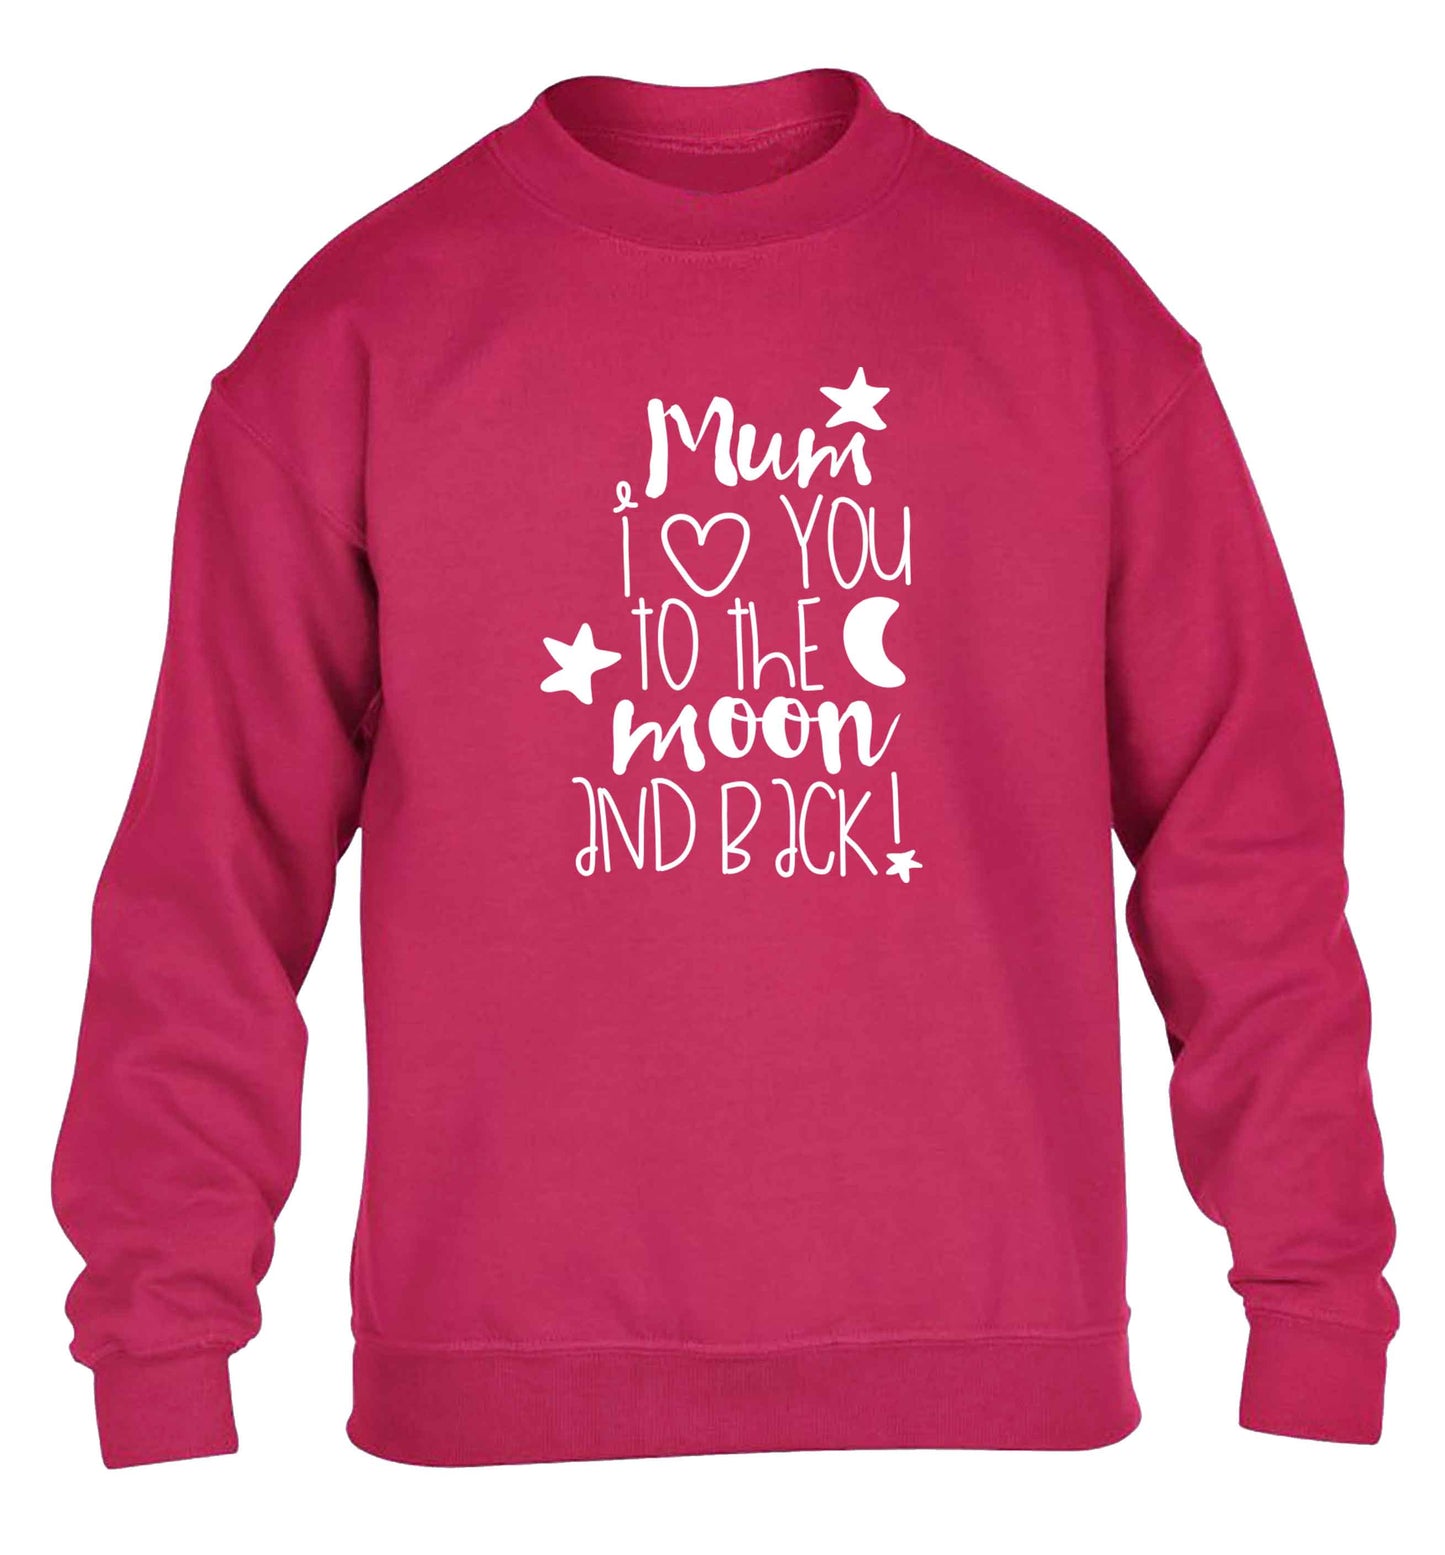 Mum I love you to the moon and back children's pink sweater 12-13 Years